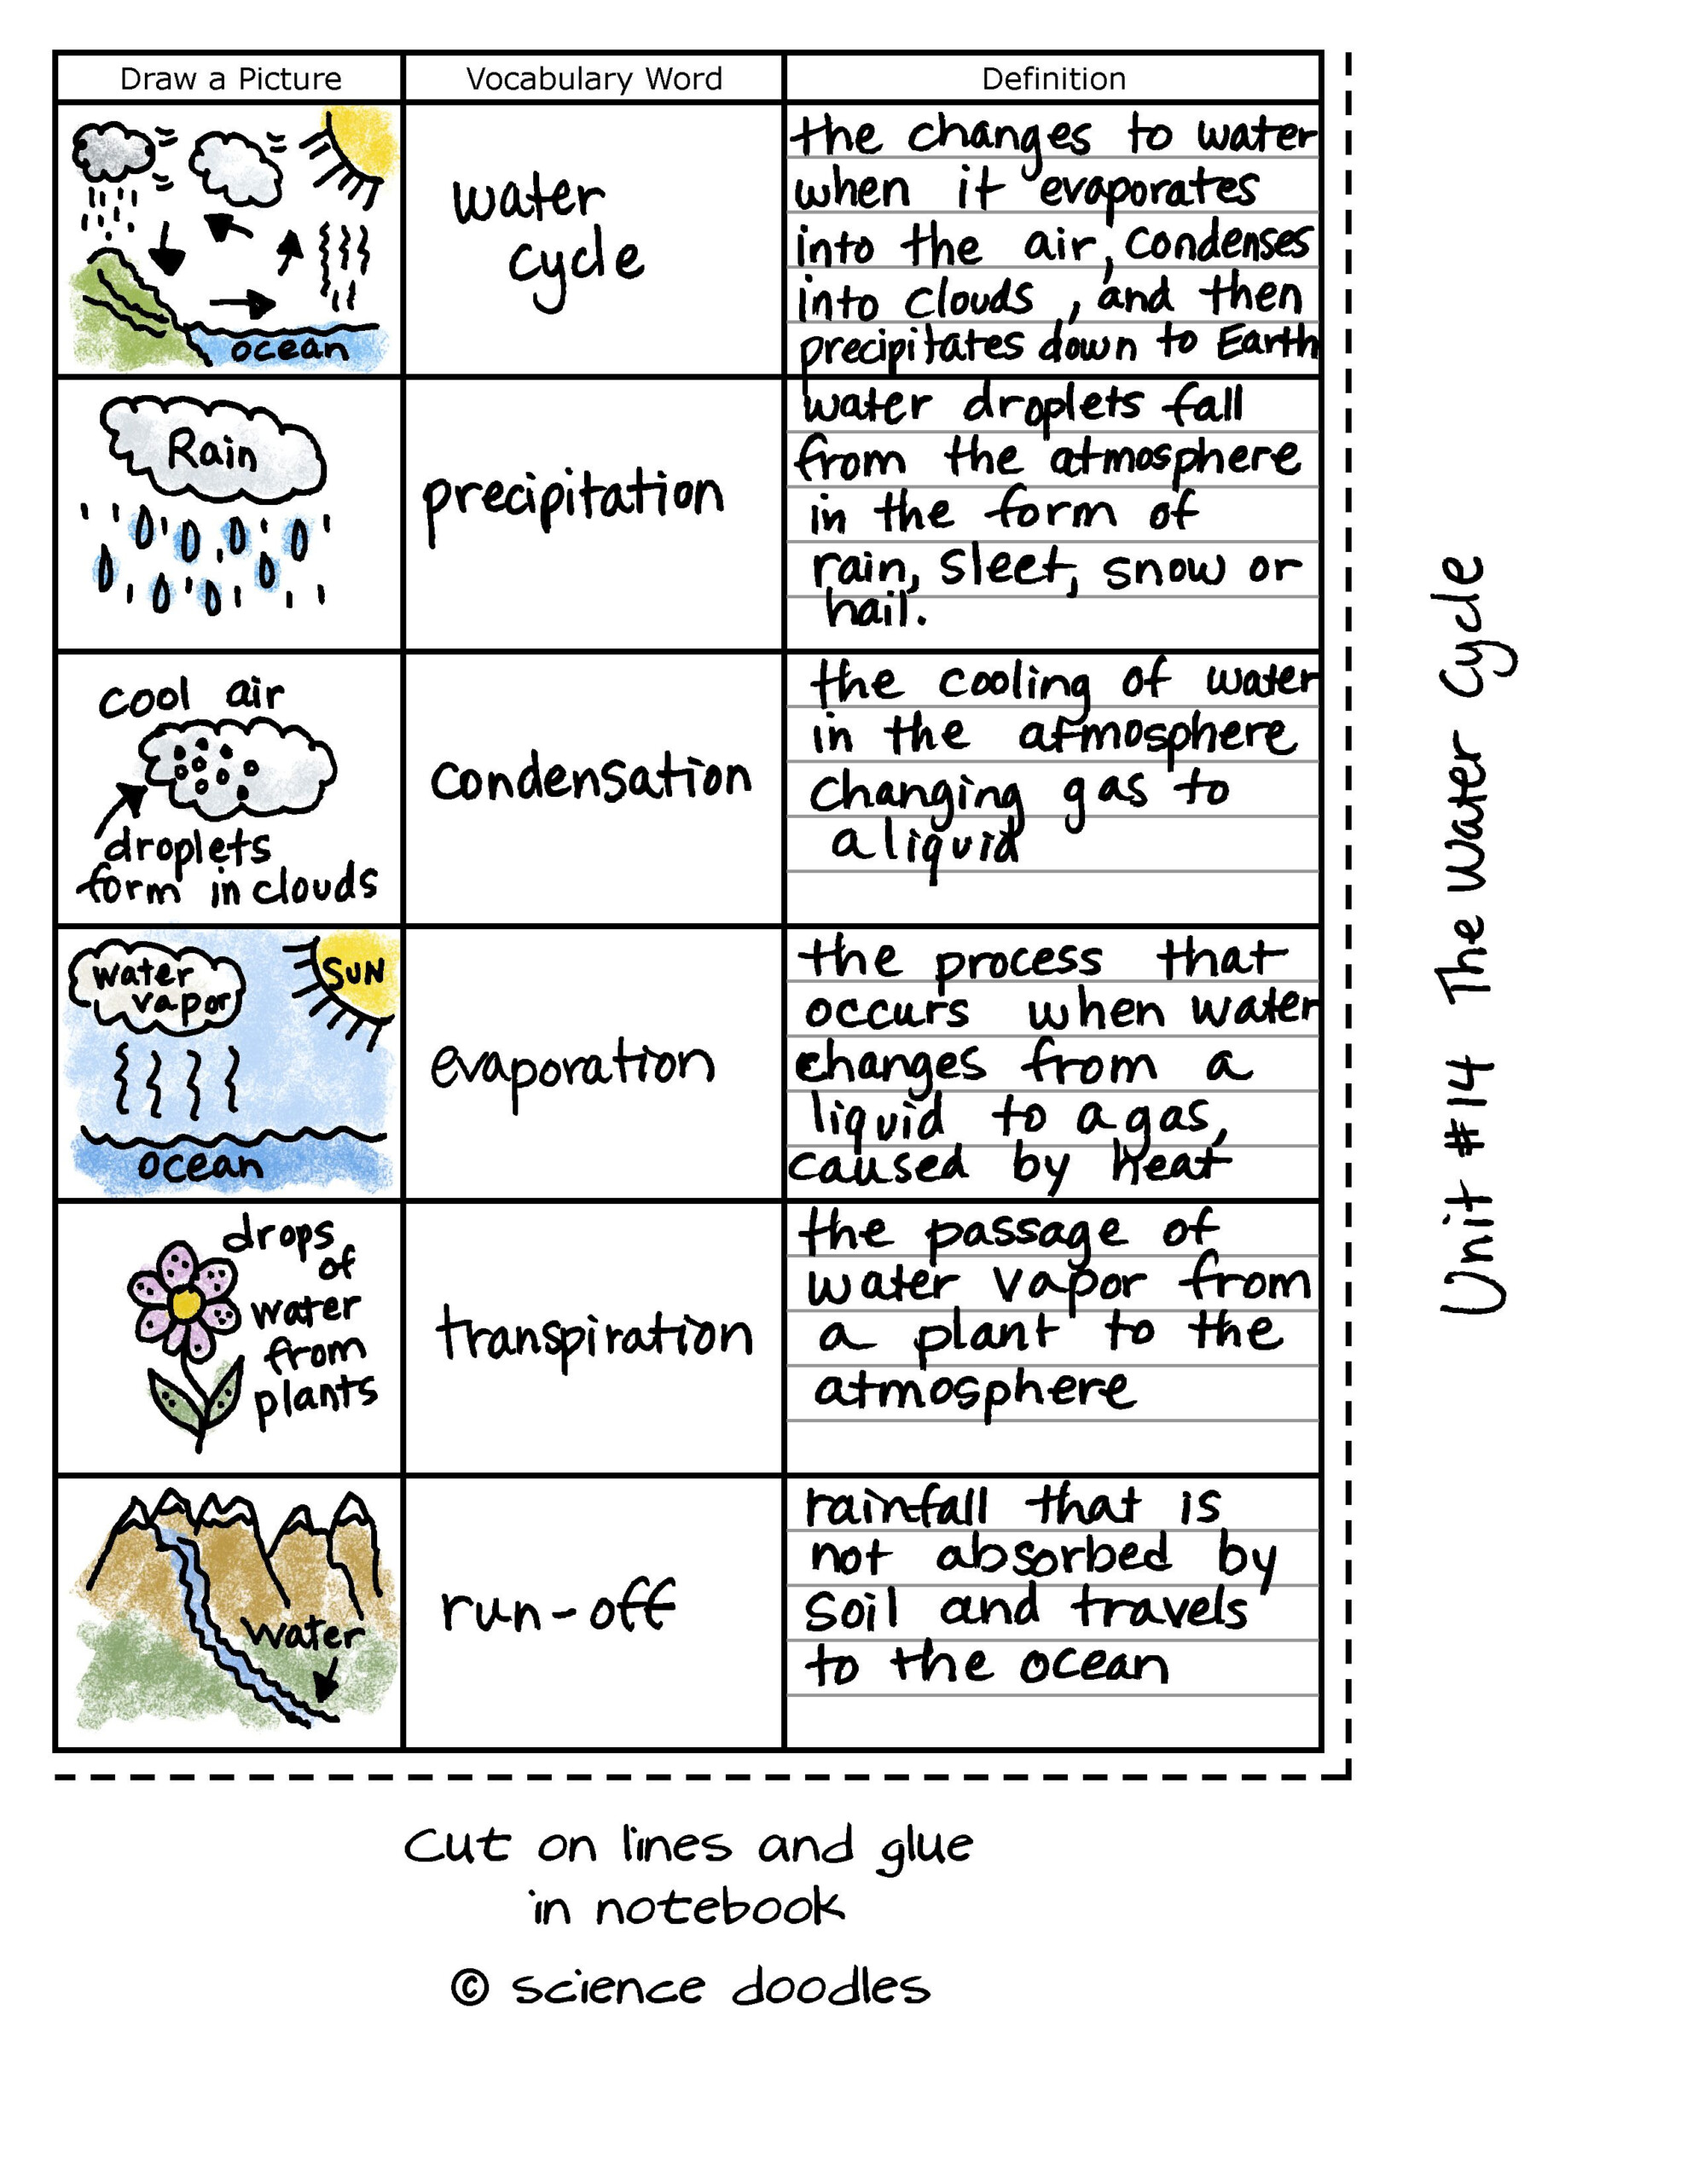 Definition Of Water Cycle For Grade 4 DERIFIT